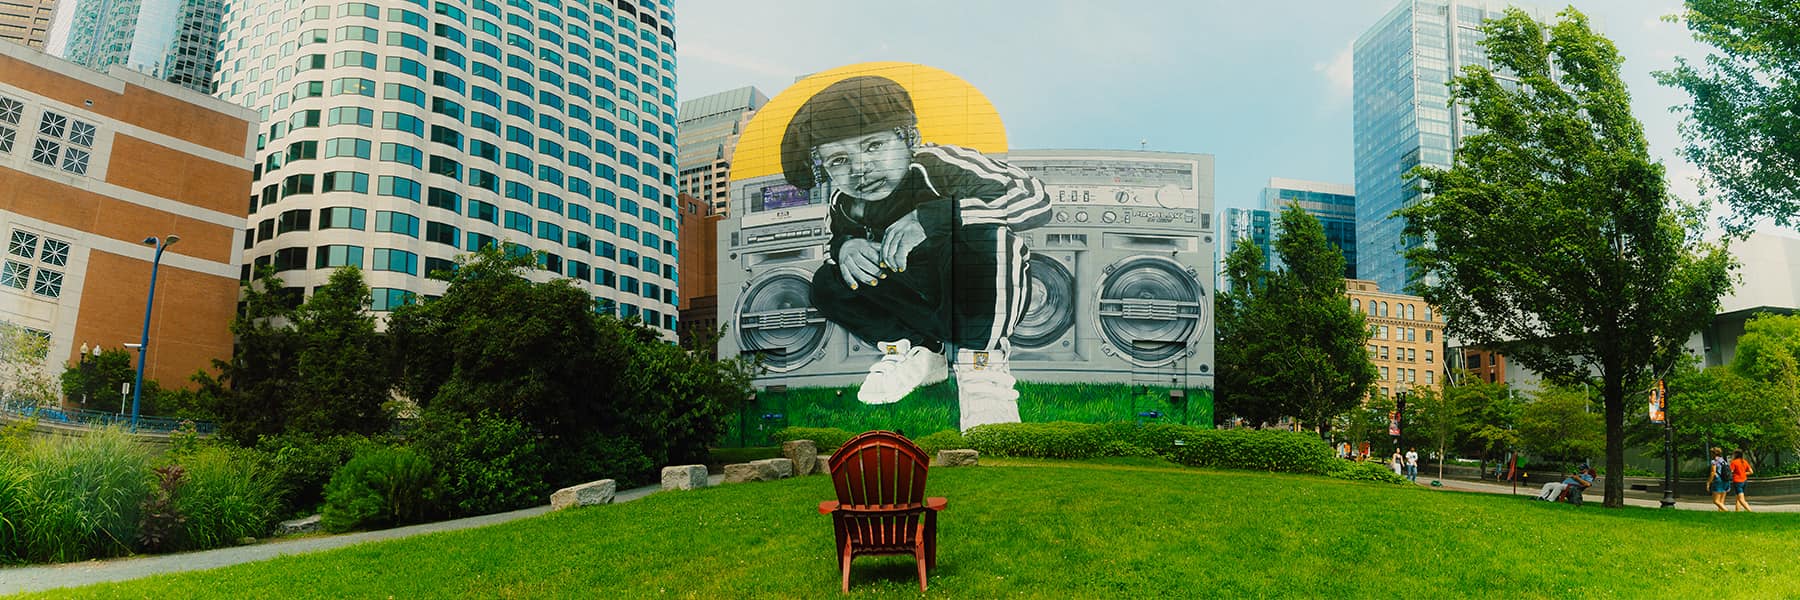 ProBlak mural of person in front of boombox on building on Boston Greenway.